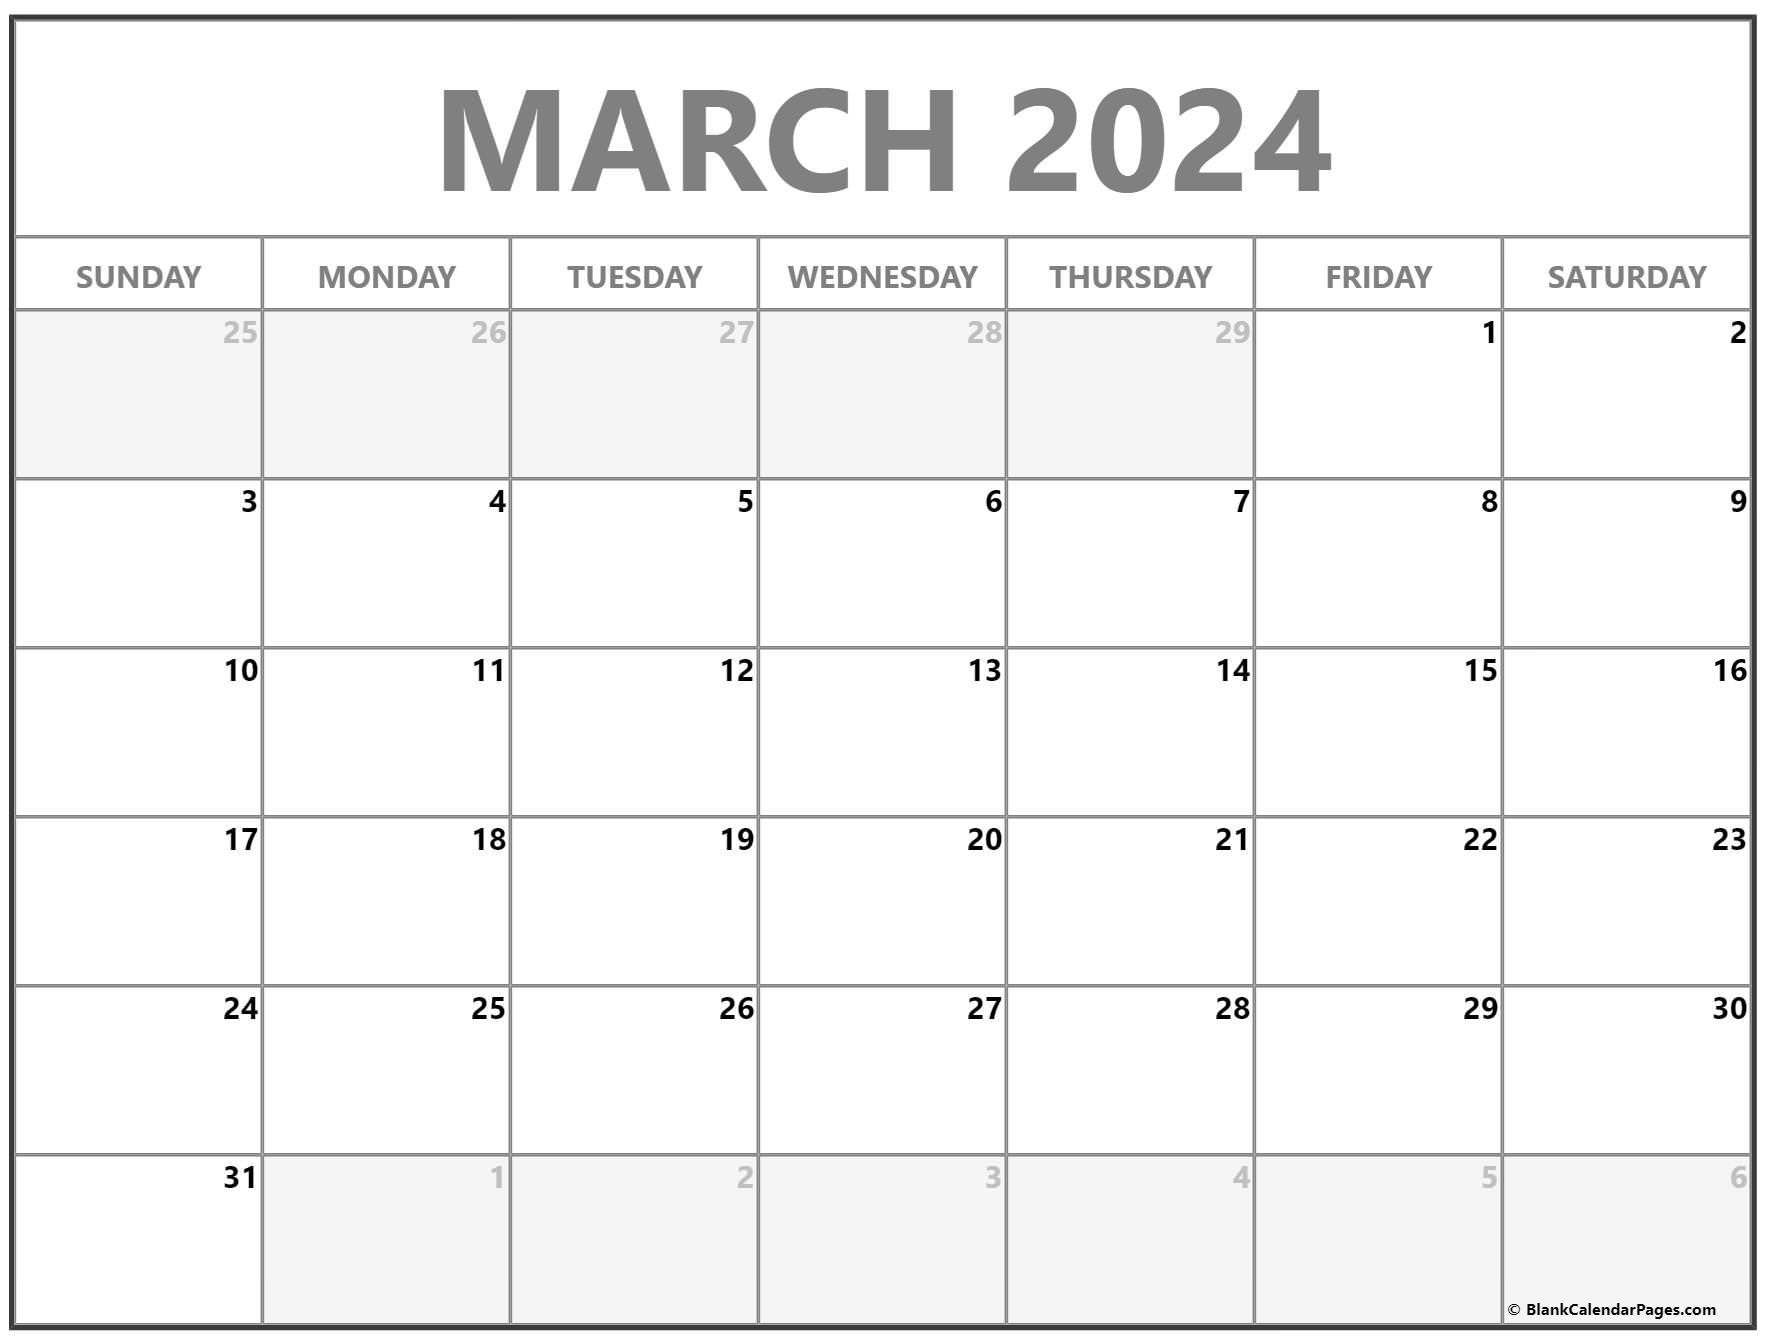 March 2022 calendar | free printable monthly calendars